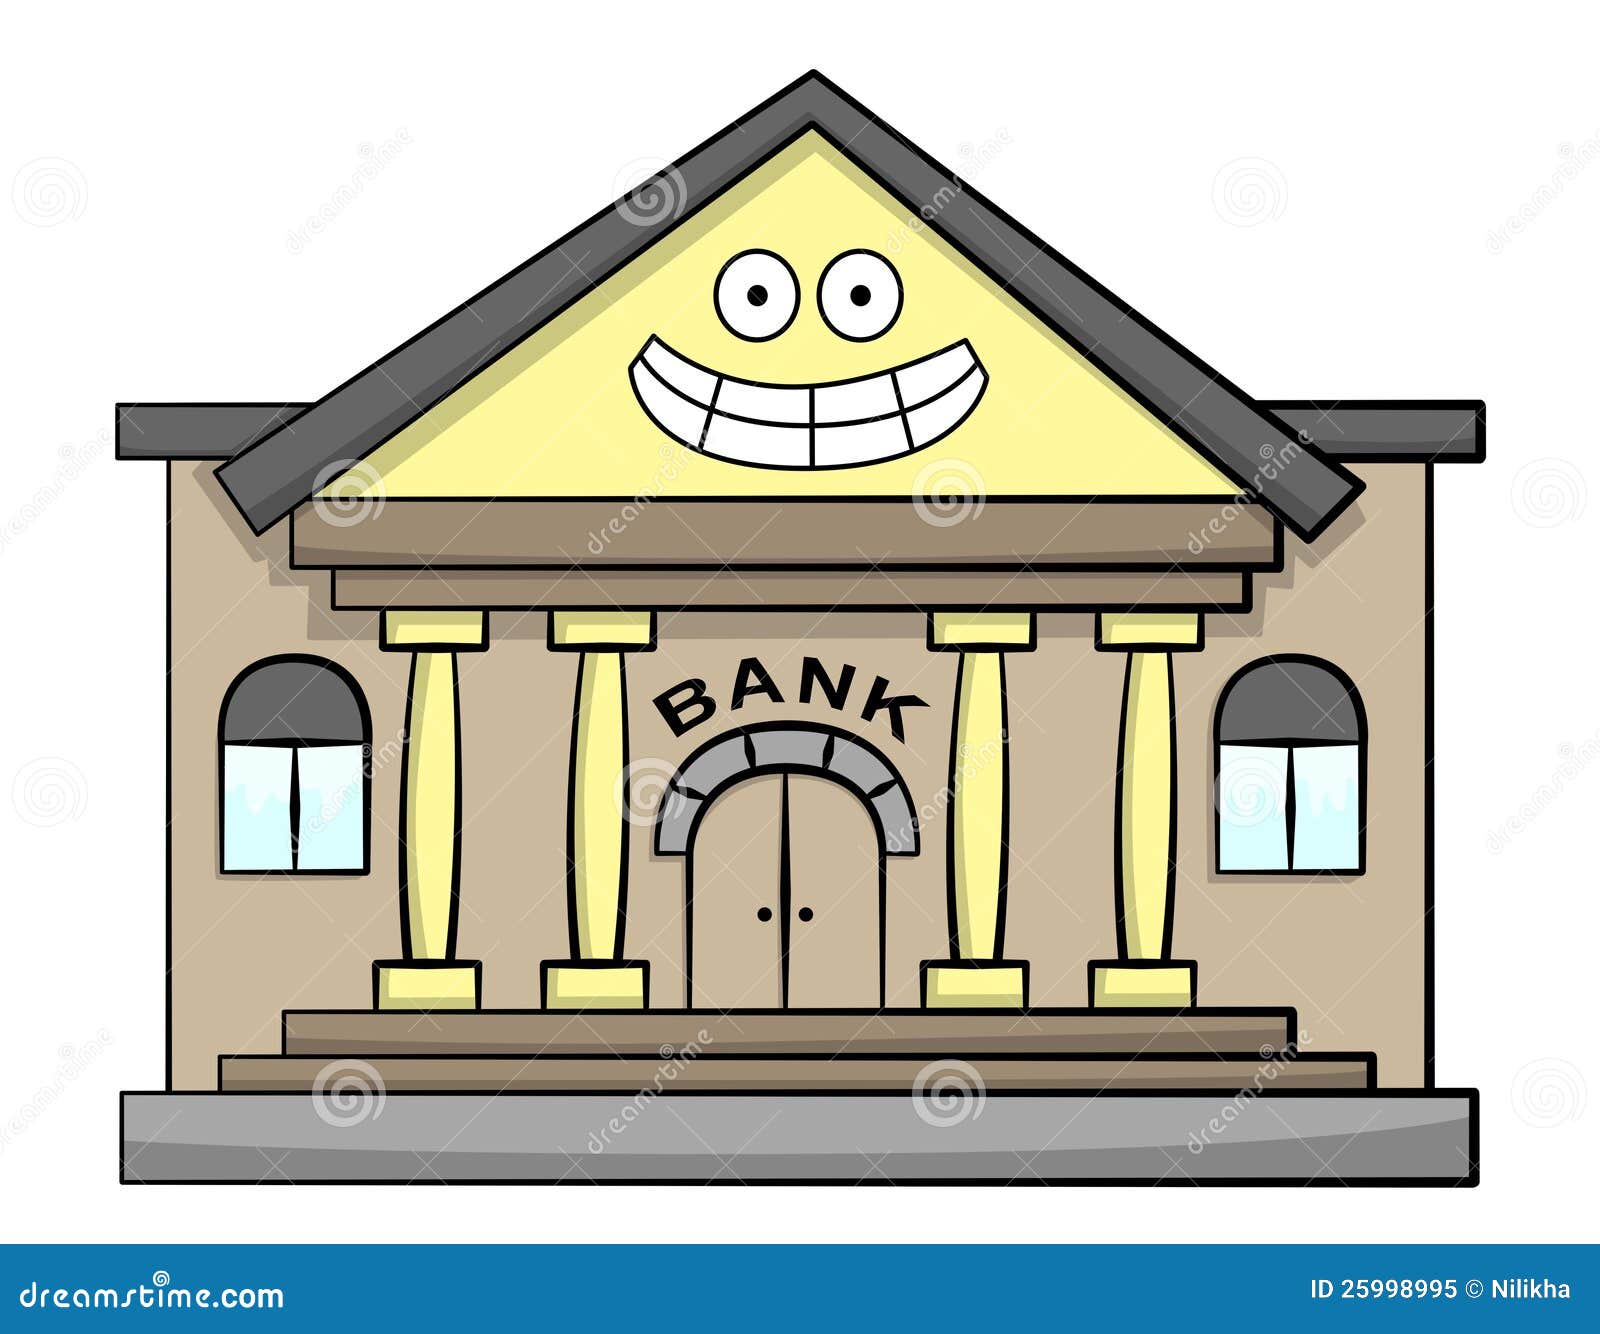 banker clipart - photo #37